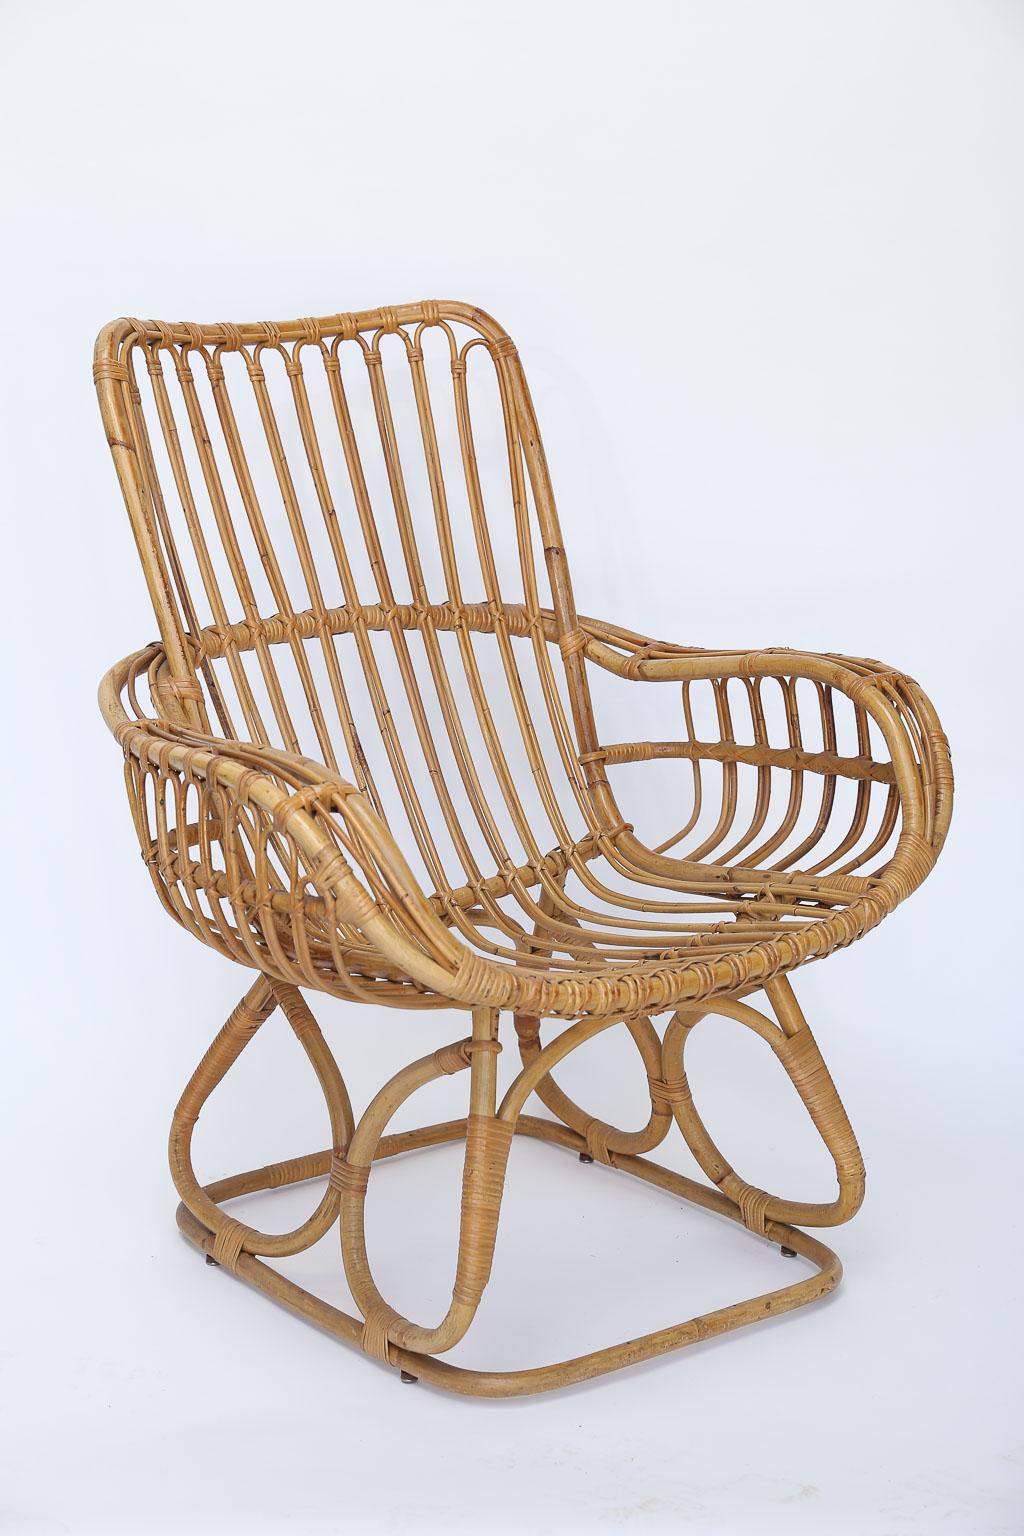 Made in Denmark a wonderful rattan armchair designed by Viggo Boesen. Curved and contoured for comfort, a perfect addition to your seaside home.